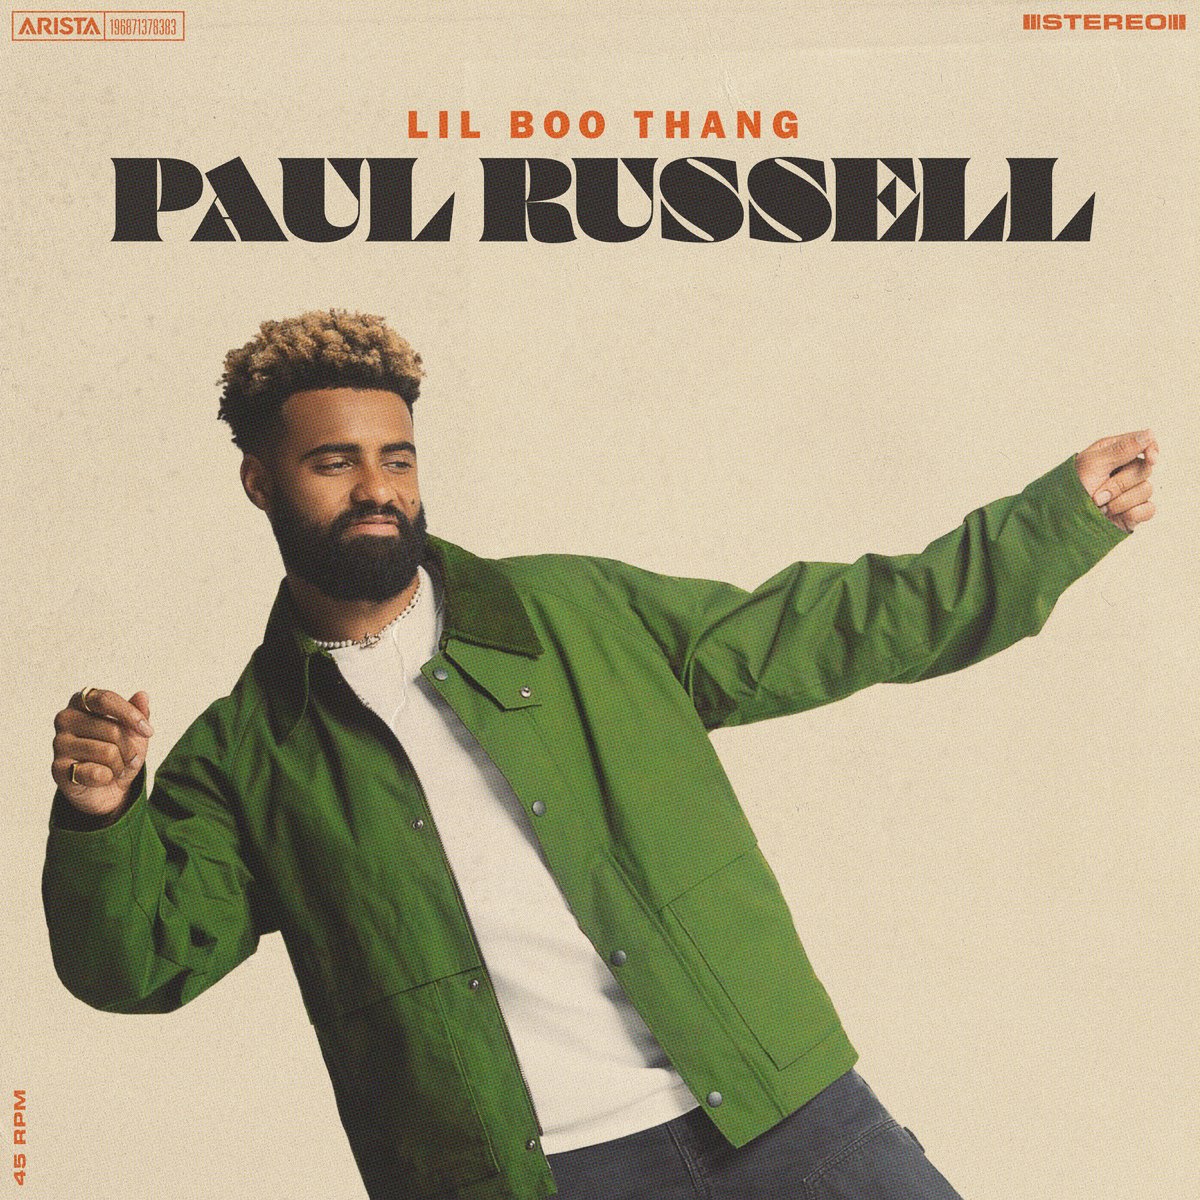 ‎Lil Boo Thang - Single - Album by Paul Russell - Apple Music